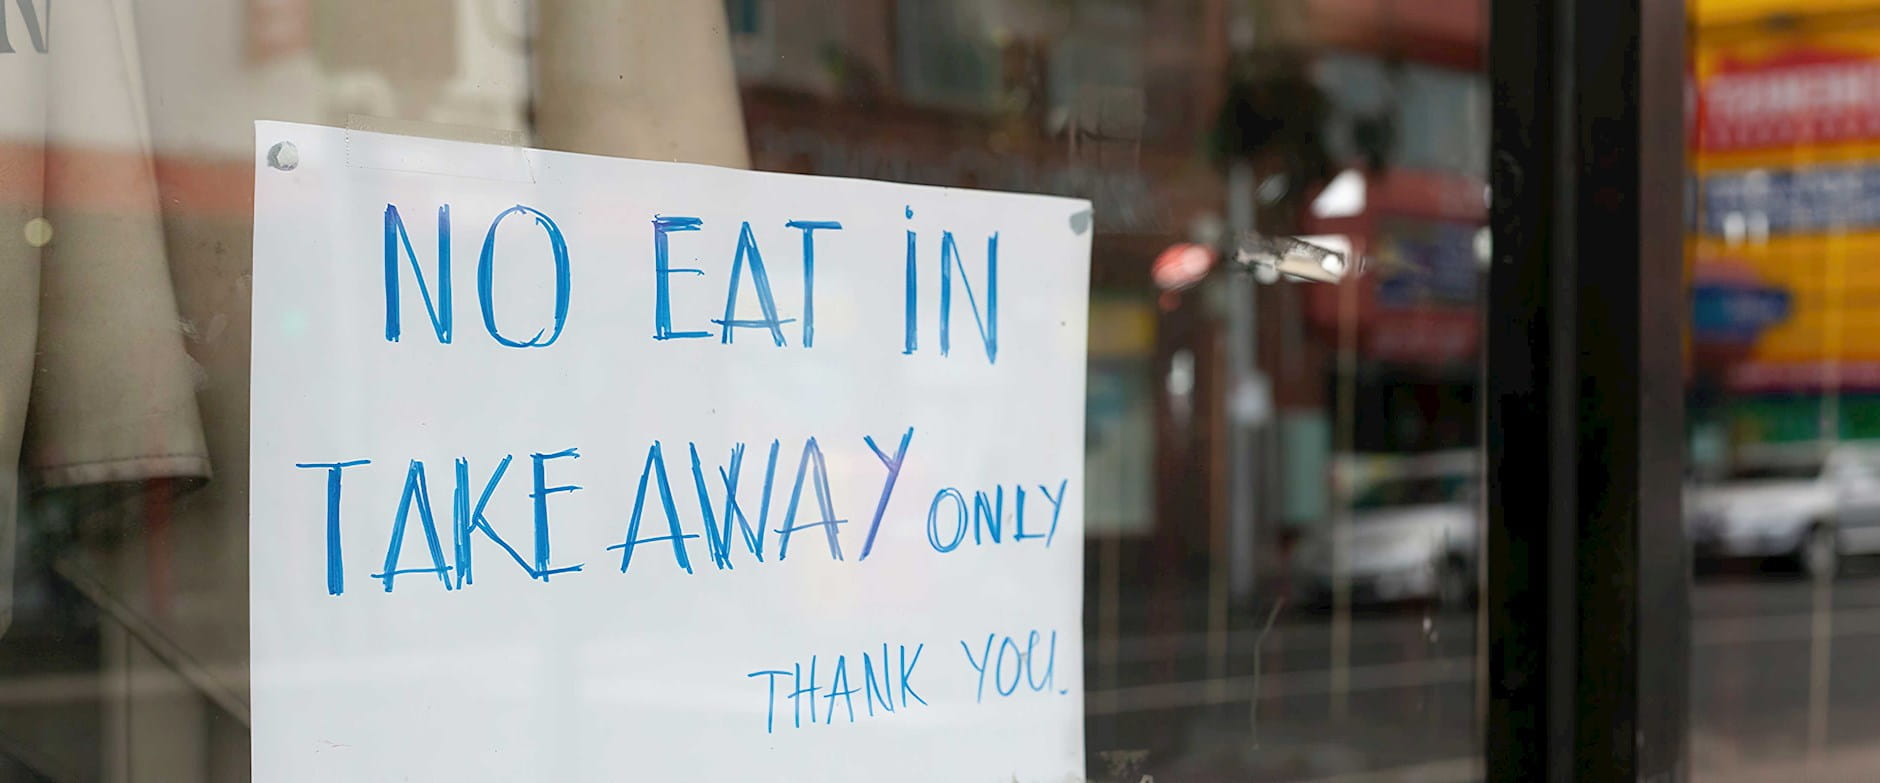 Sign that says "No eat in take away only. Thank you"